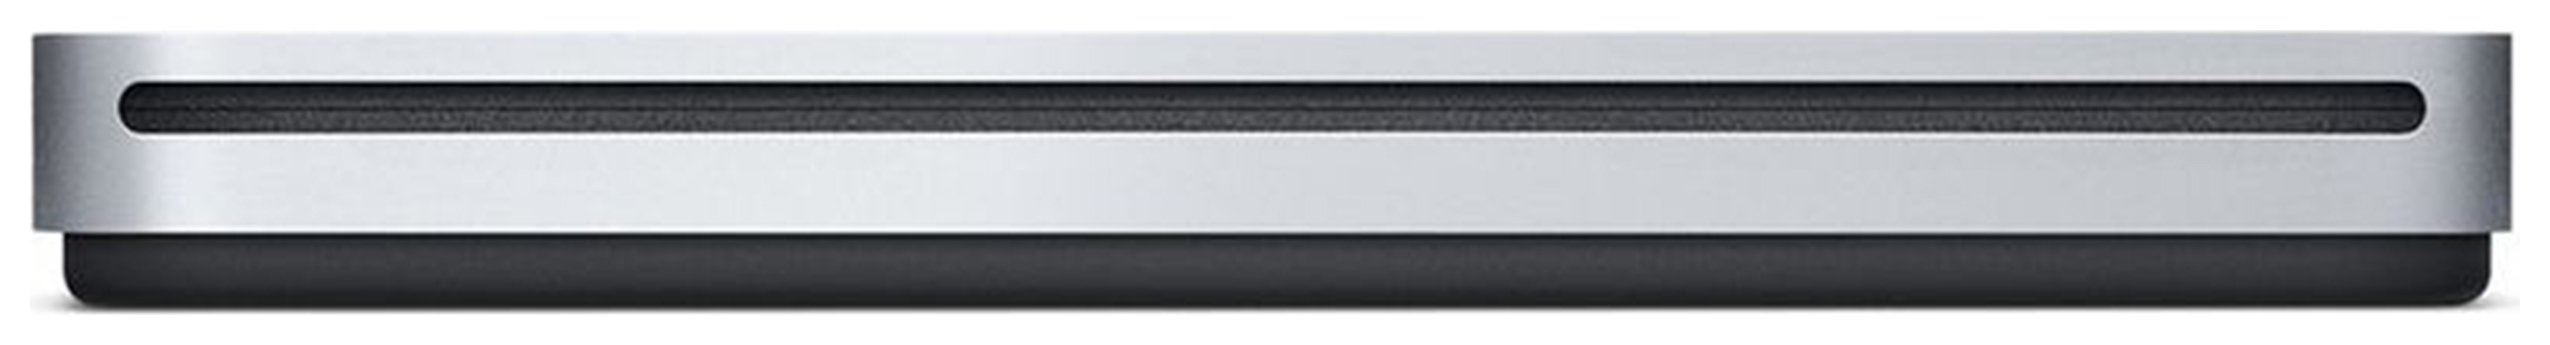 Apple USB SuperDrive DVD Re-Writer. Review